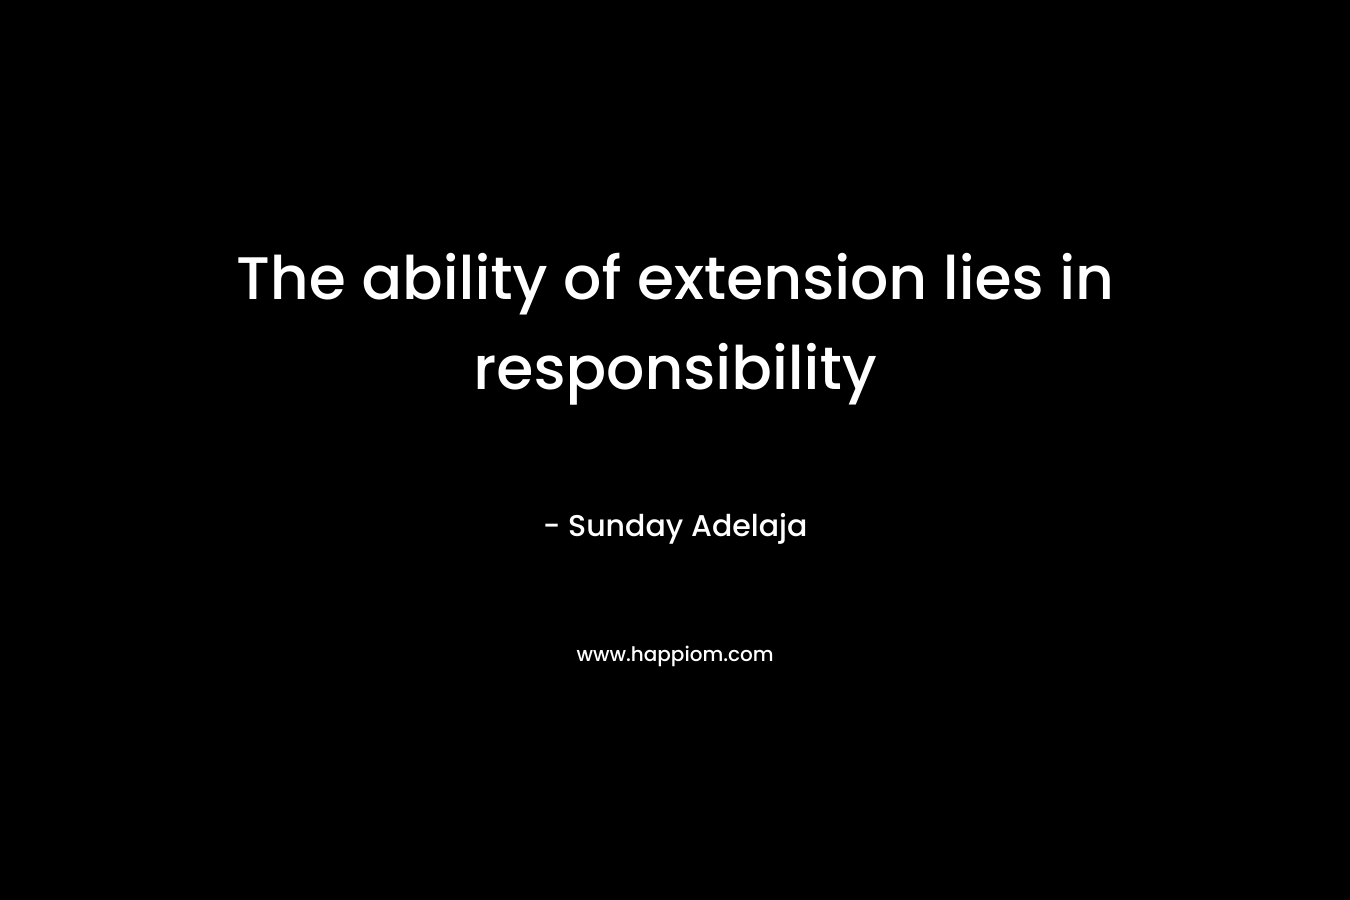 The ability of extension lies in responsibility